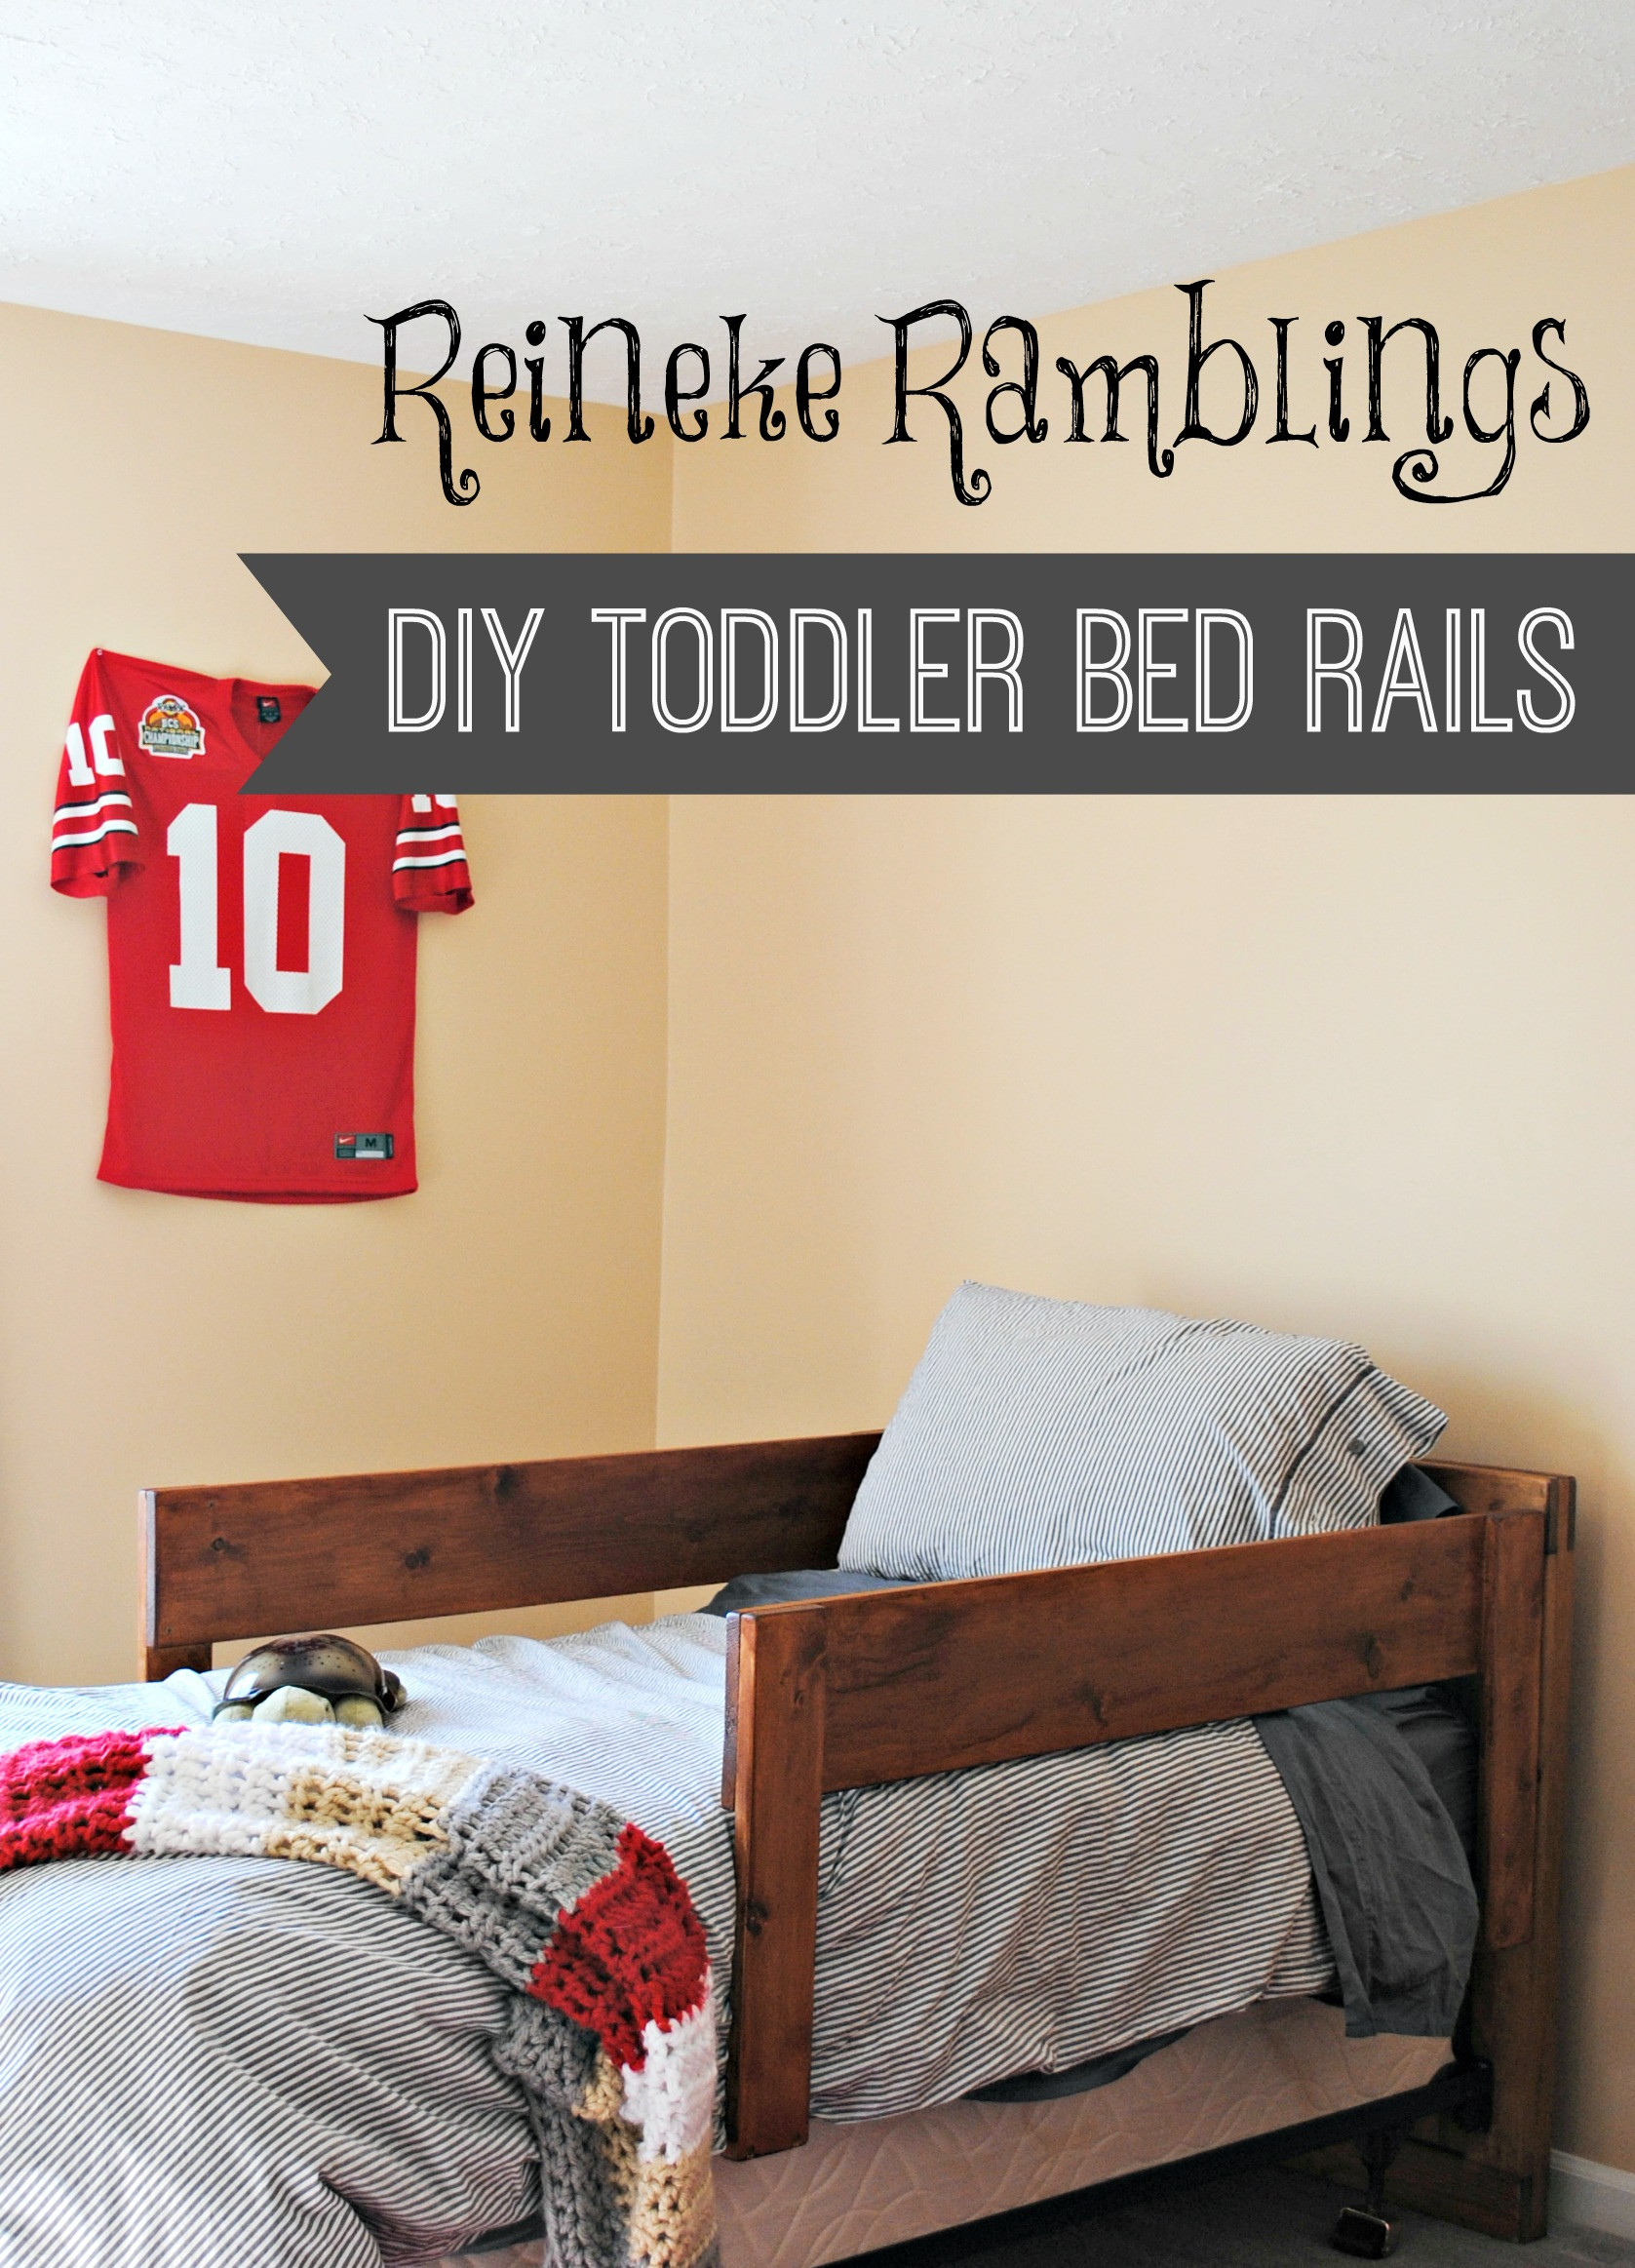 DIY Bed Rails For Toddlers
 DIY Toddler Bed Rails cypress wool